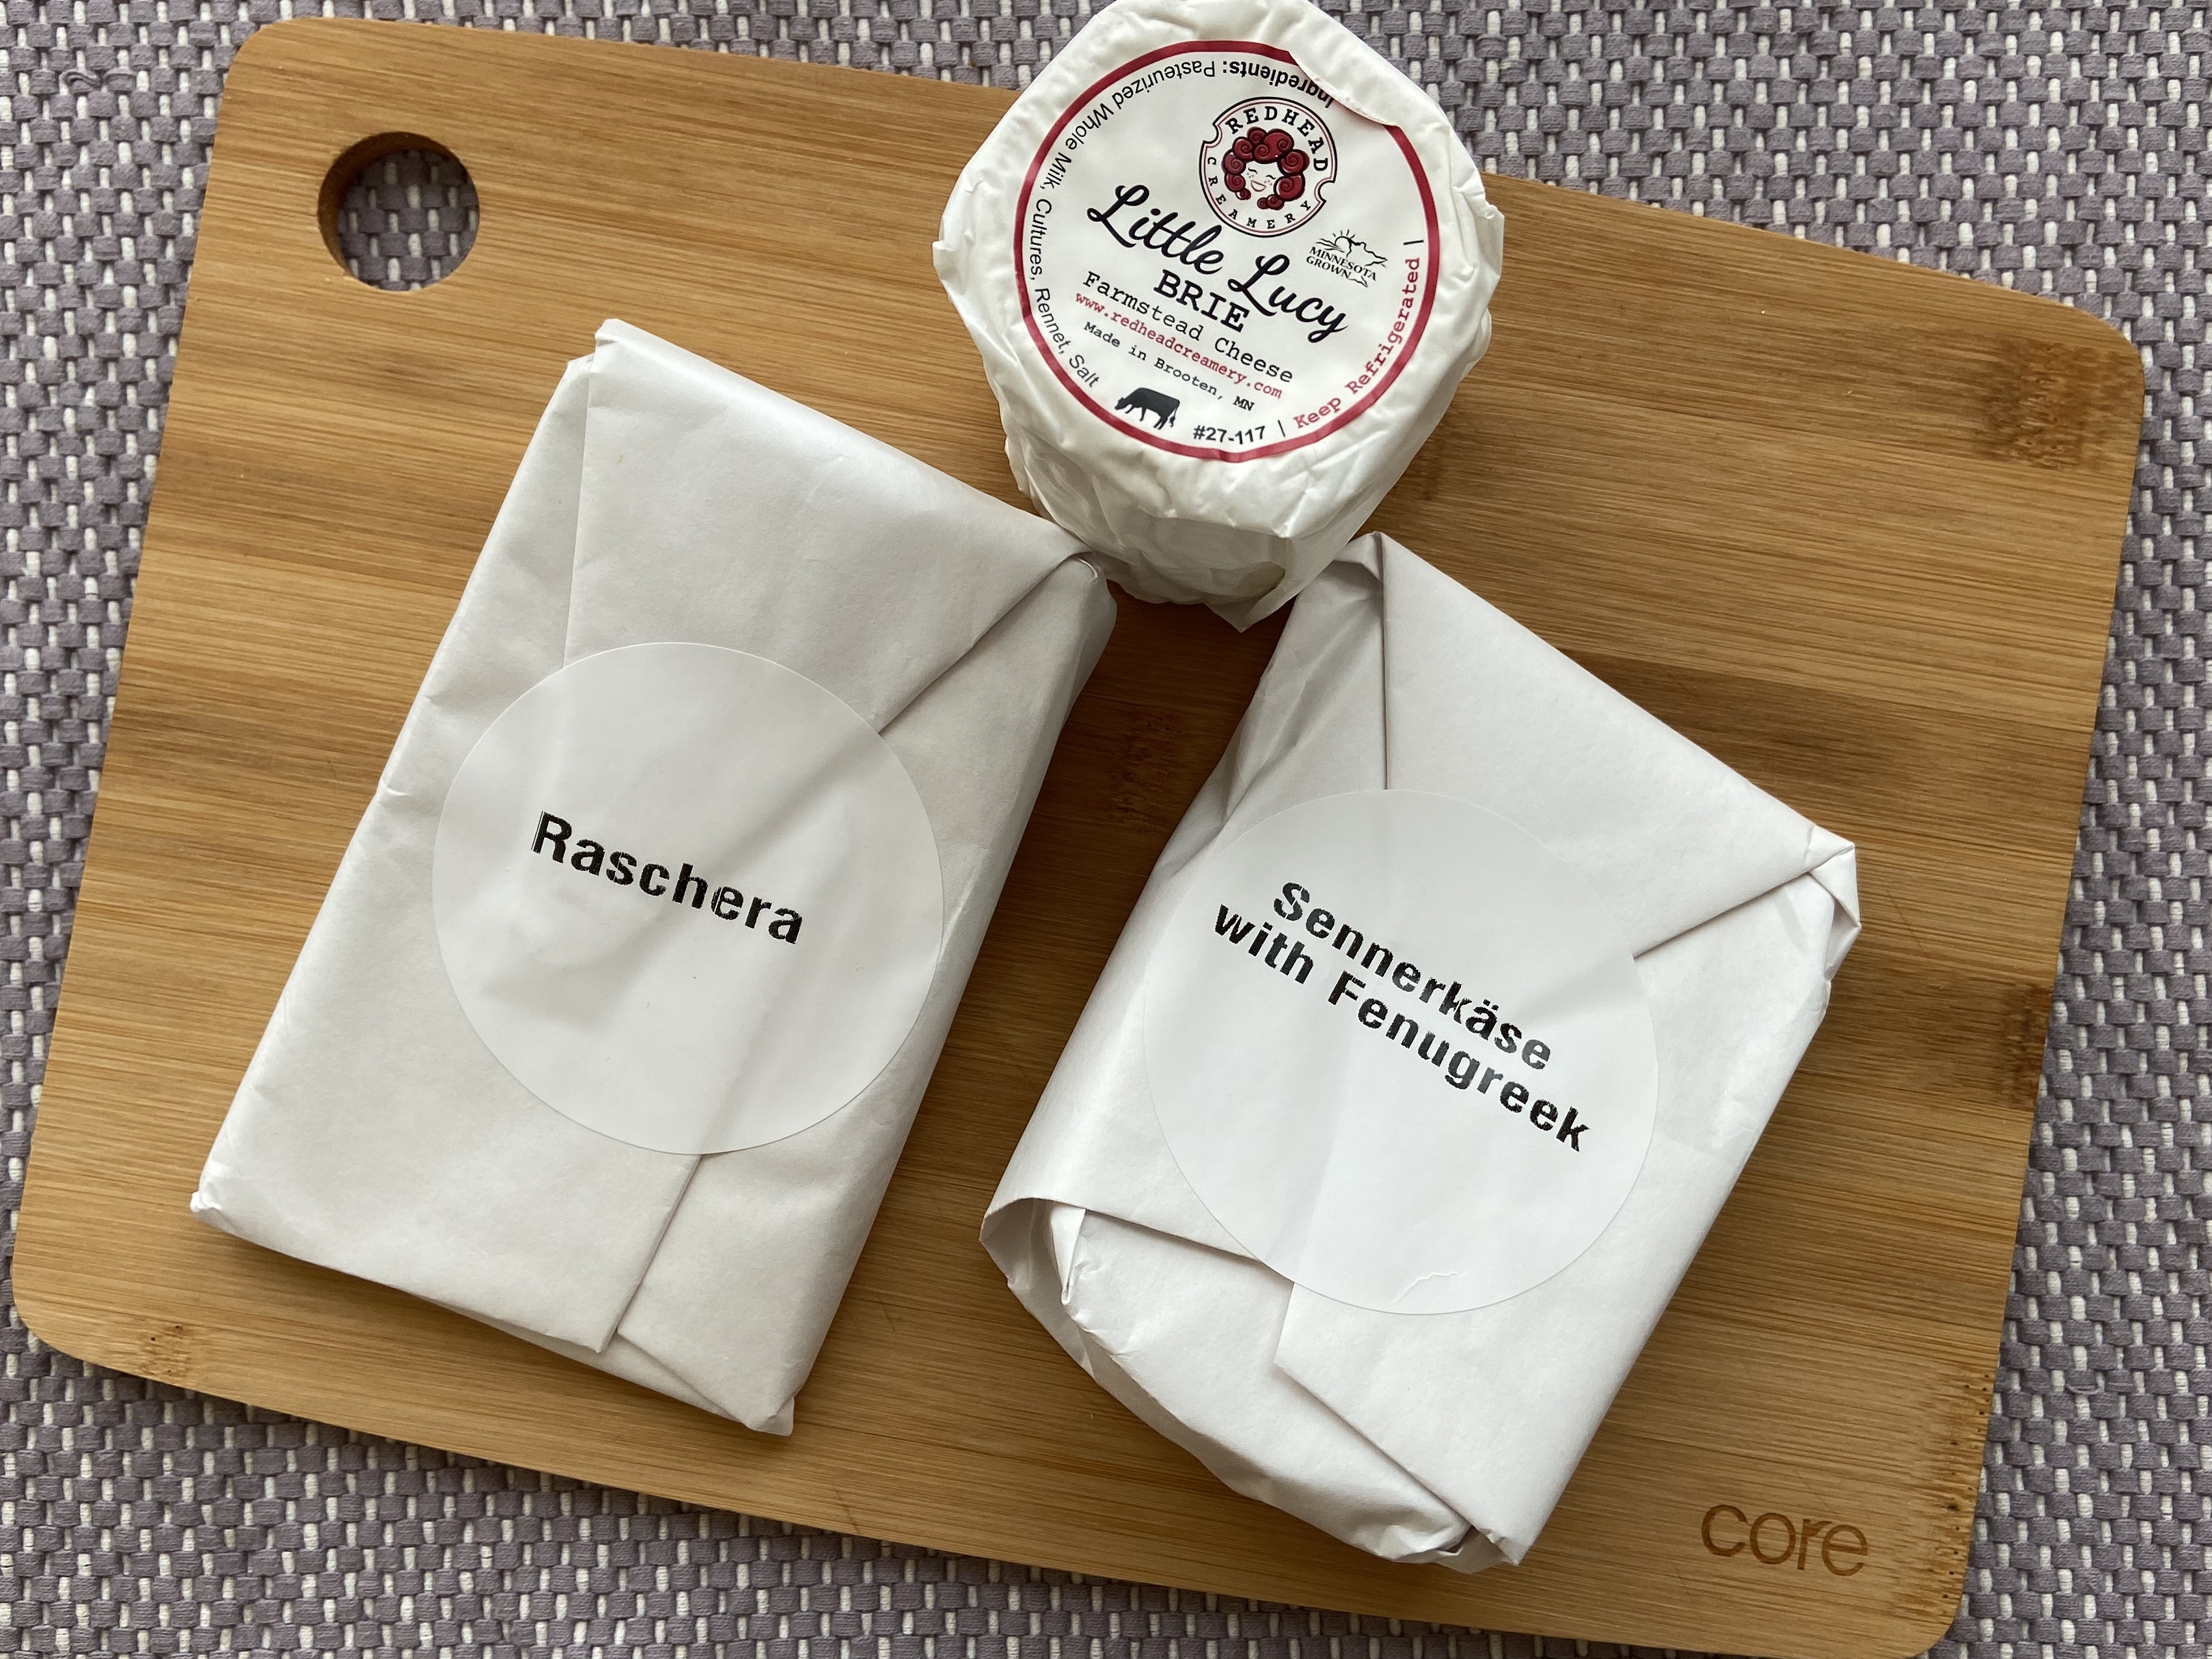 The Gourmet Cheese of the Month Club - Raschera, Redhead Creamery Little Lucy, and Obere Muhle Sennerkase with Fenugreek.